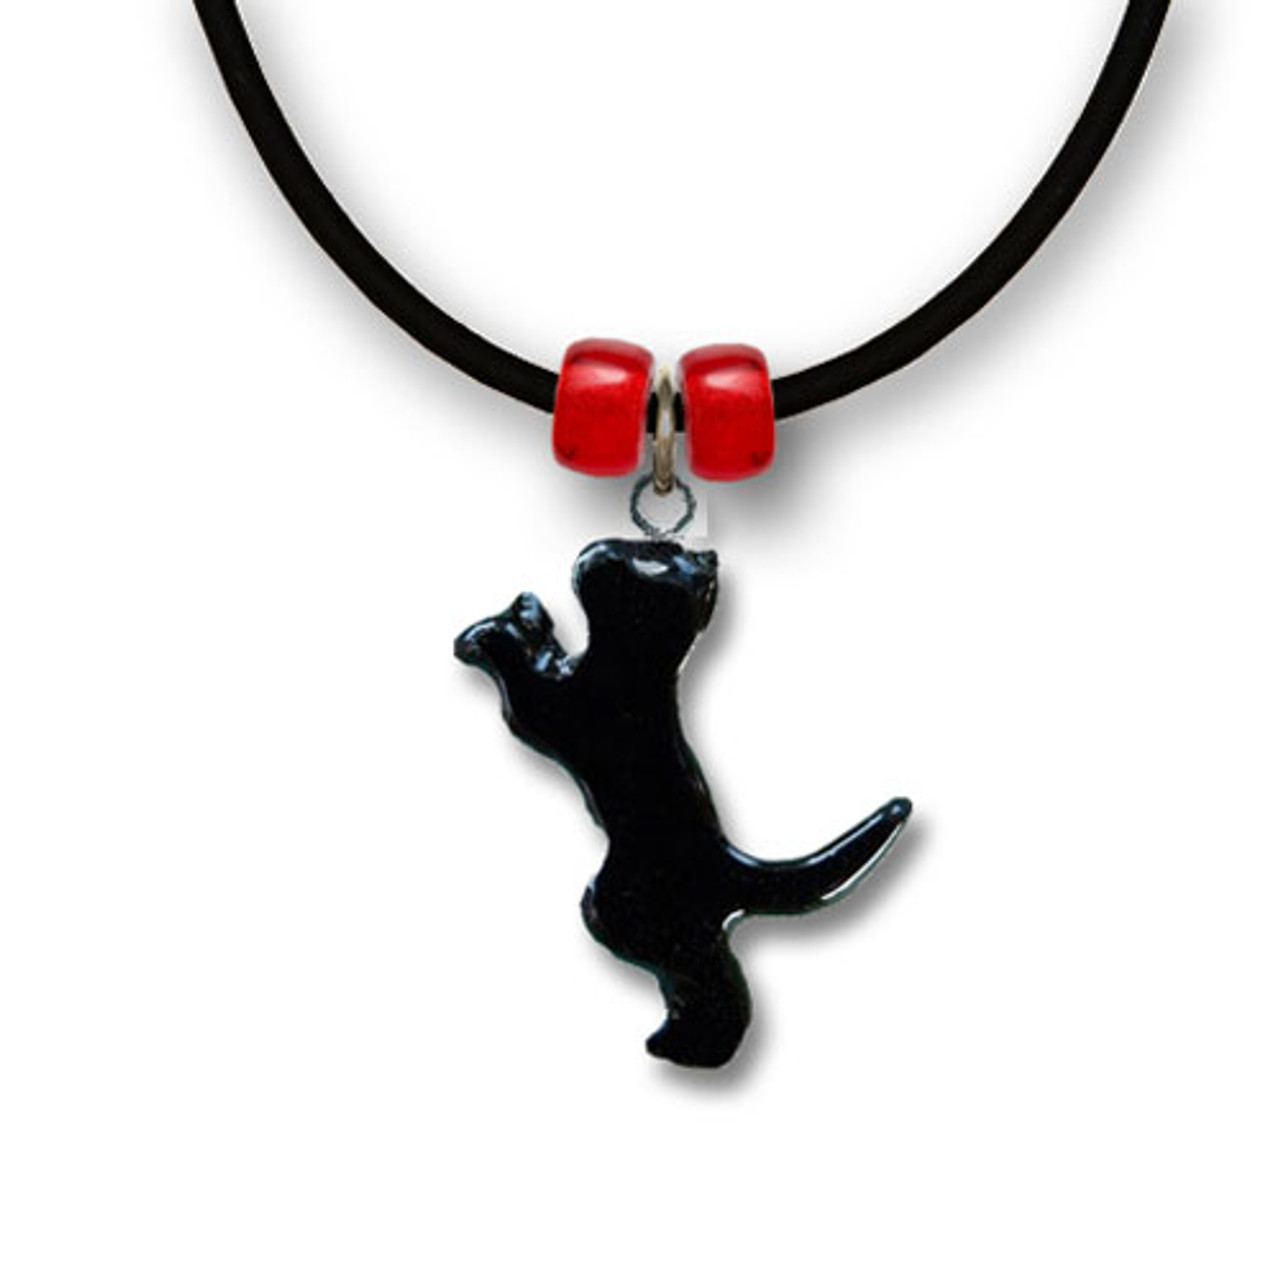 Black Cat Necklaces - Our Top Picks from 100's of Designs